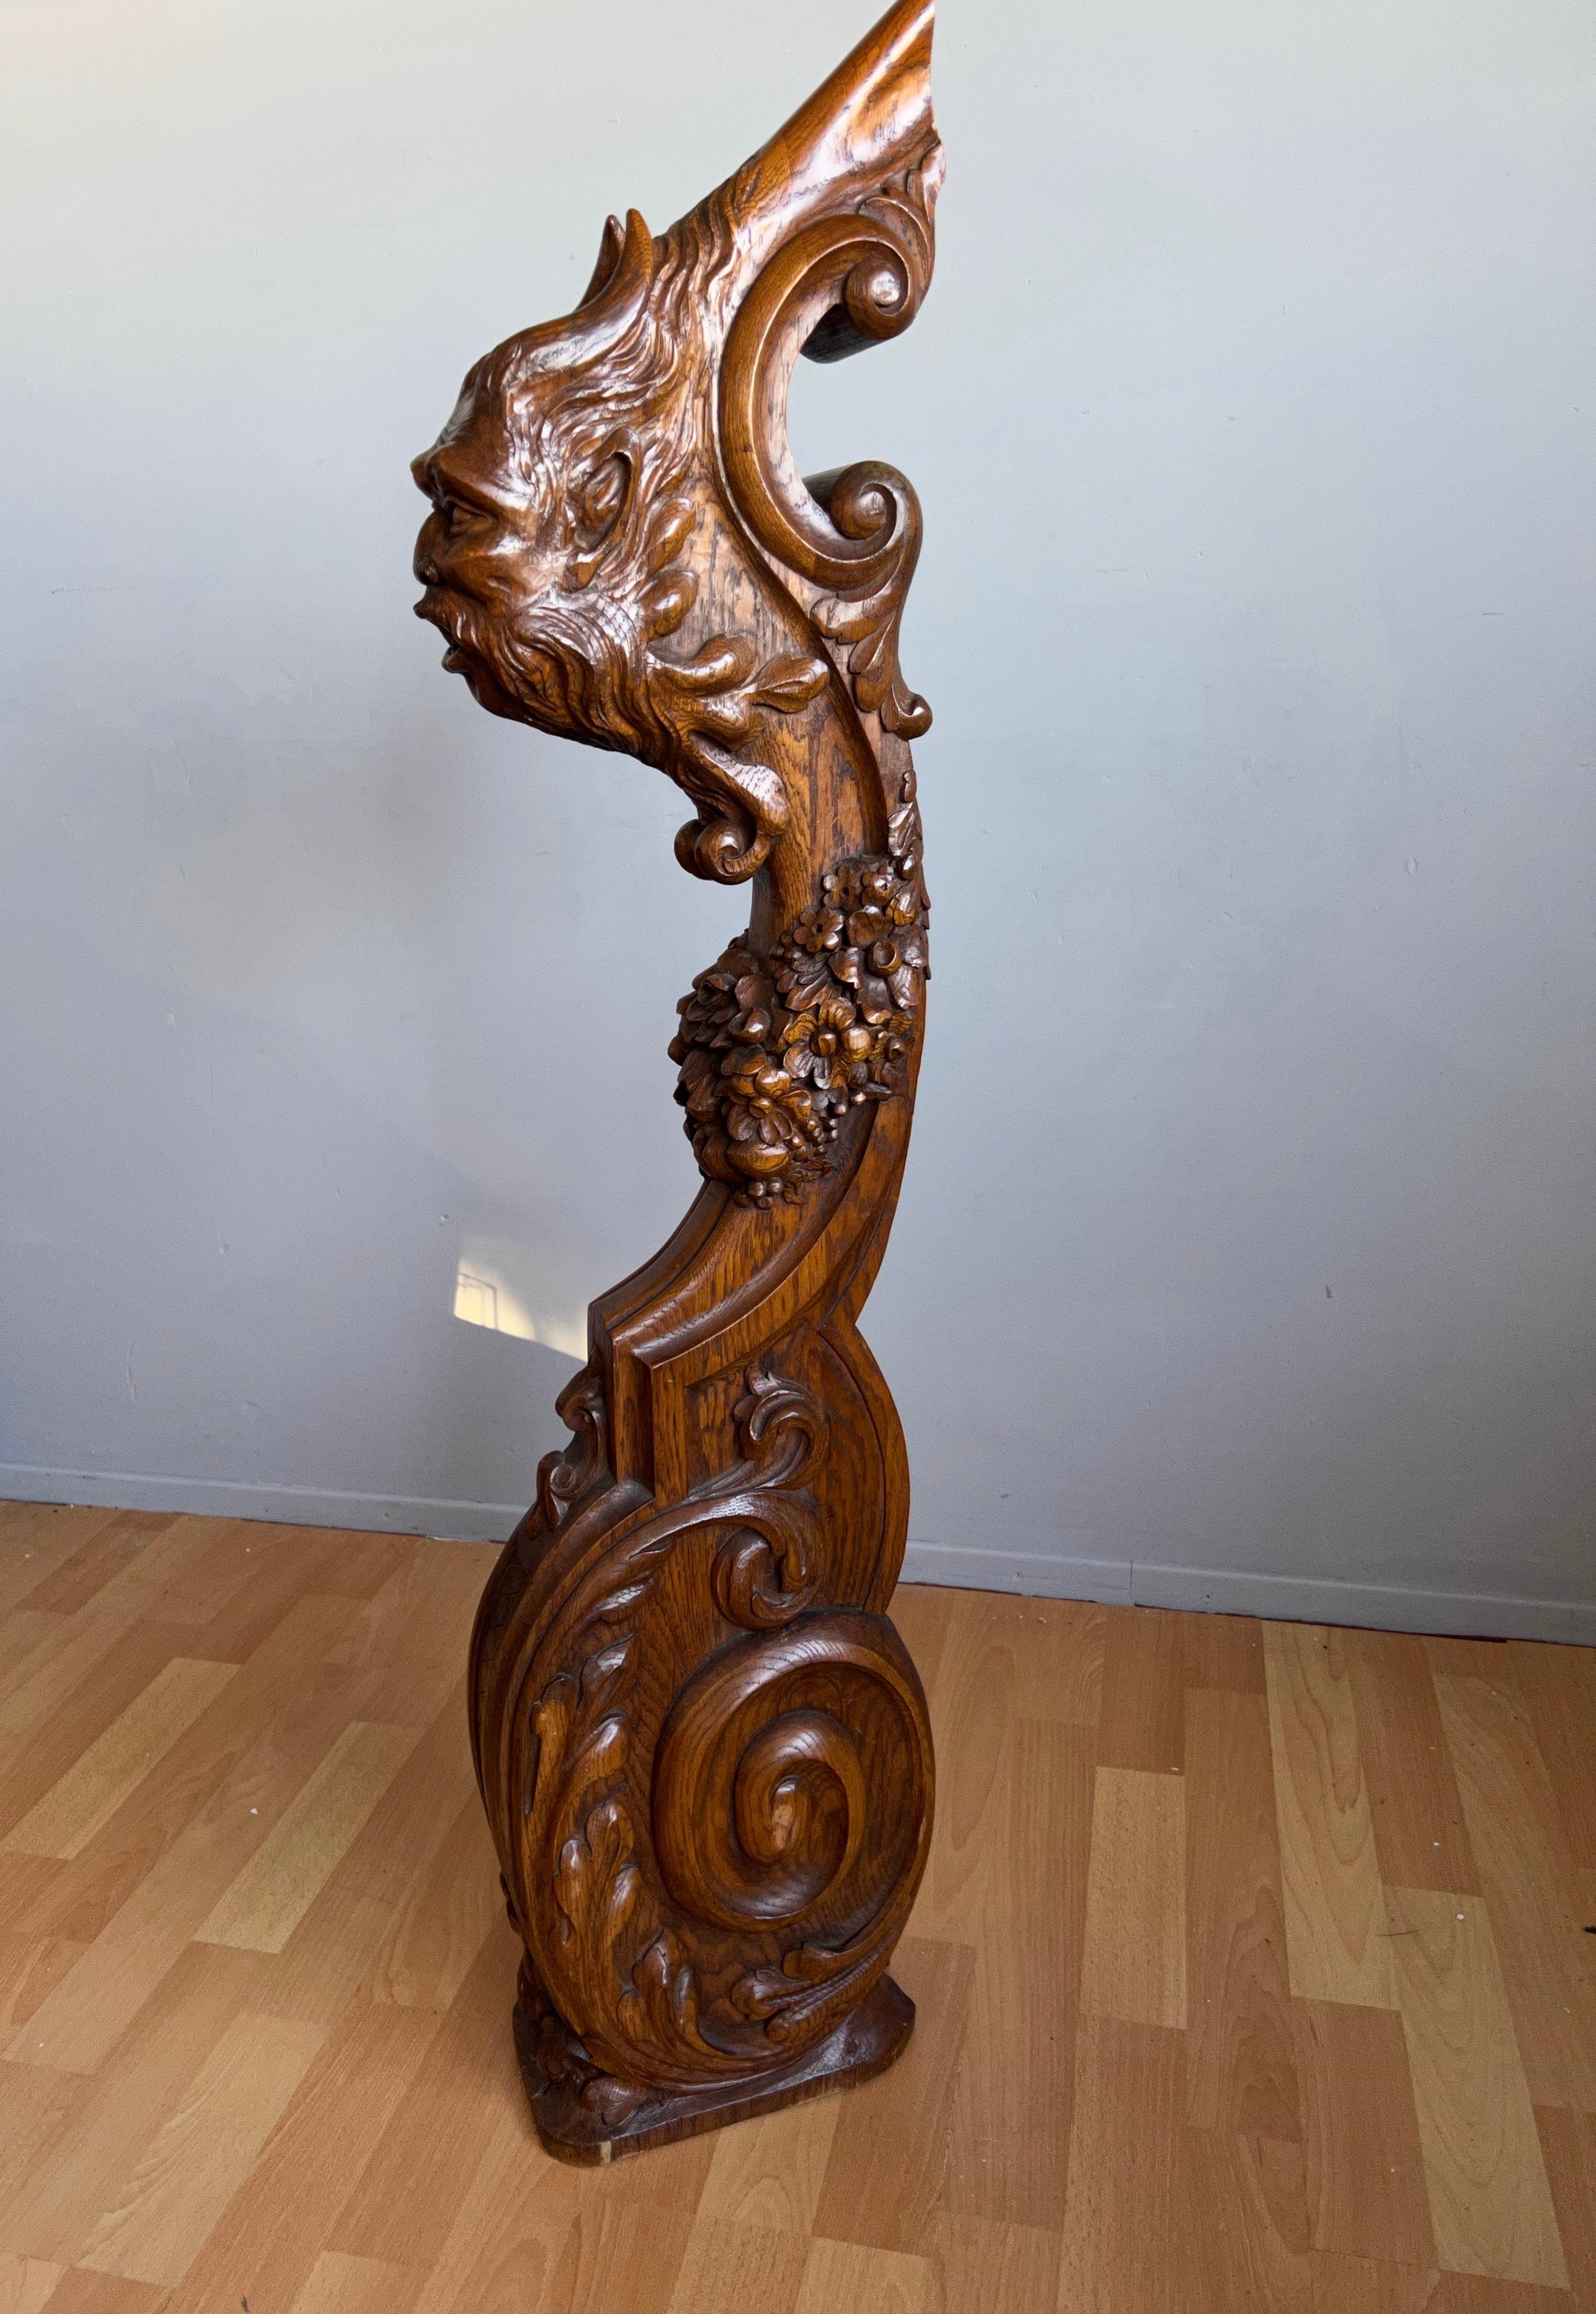 Antique Hand Carved Oak Stair Rail Newel Post with Ogre Sculpture & Many Flowers 1